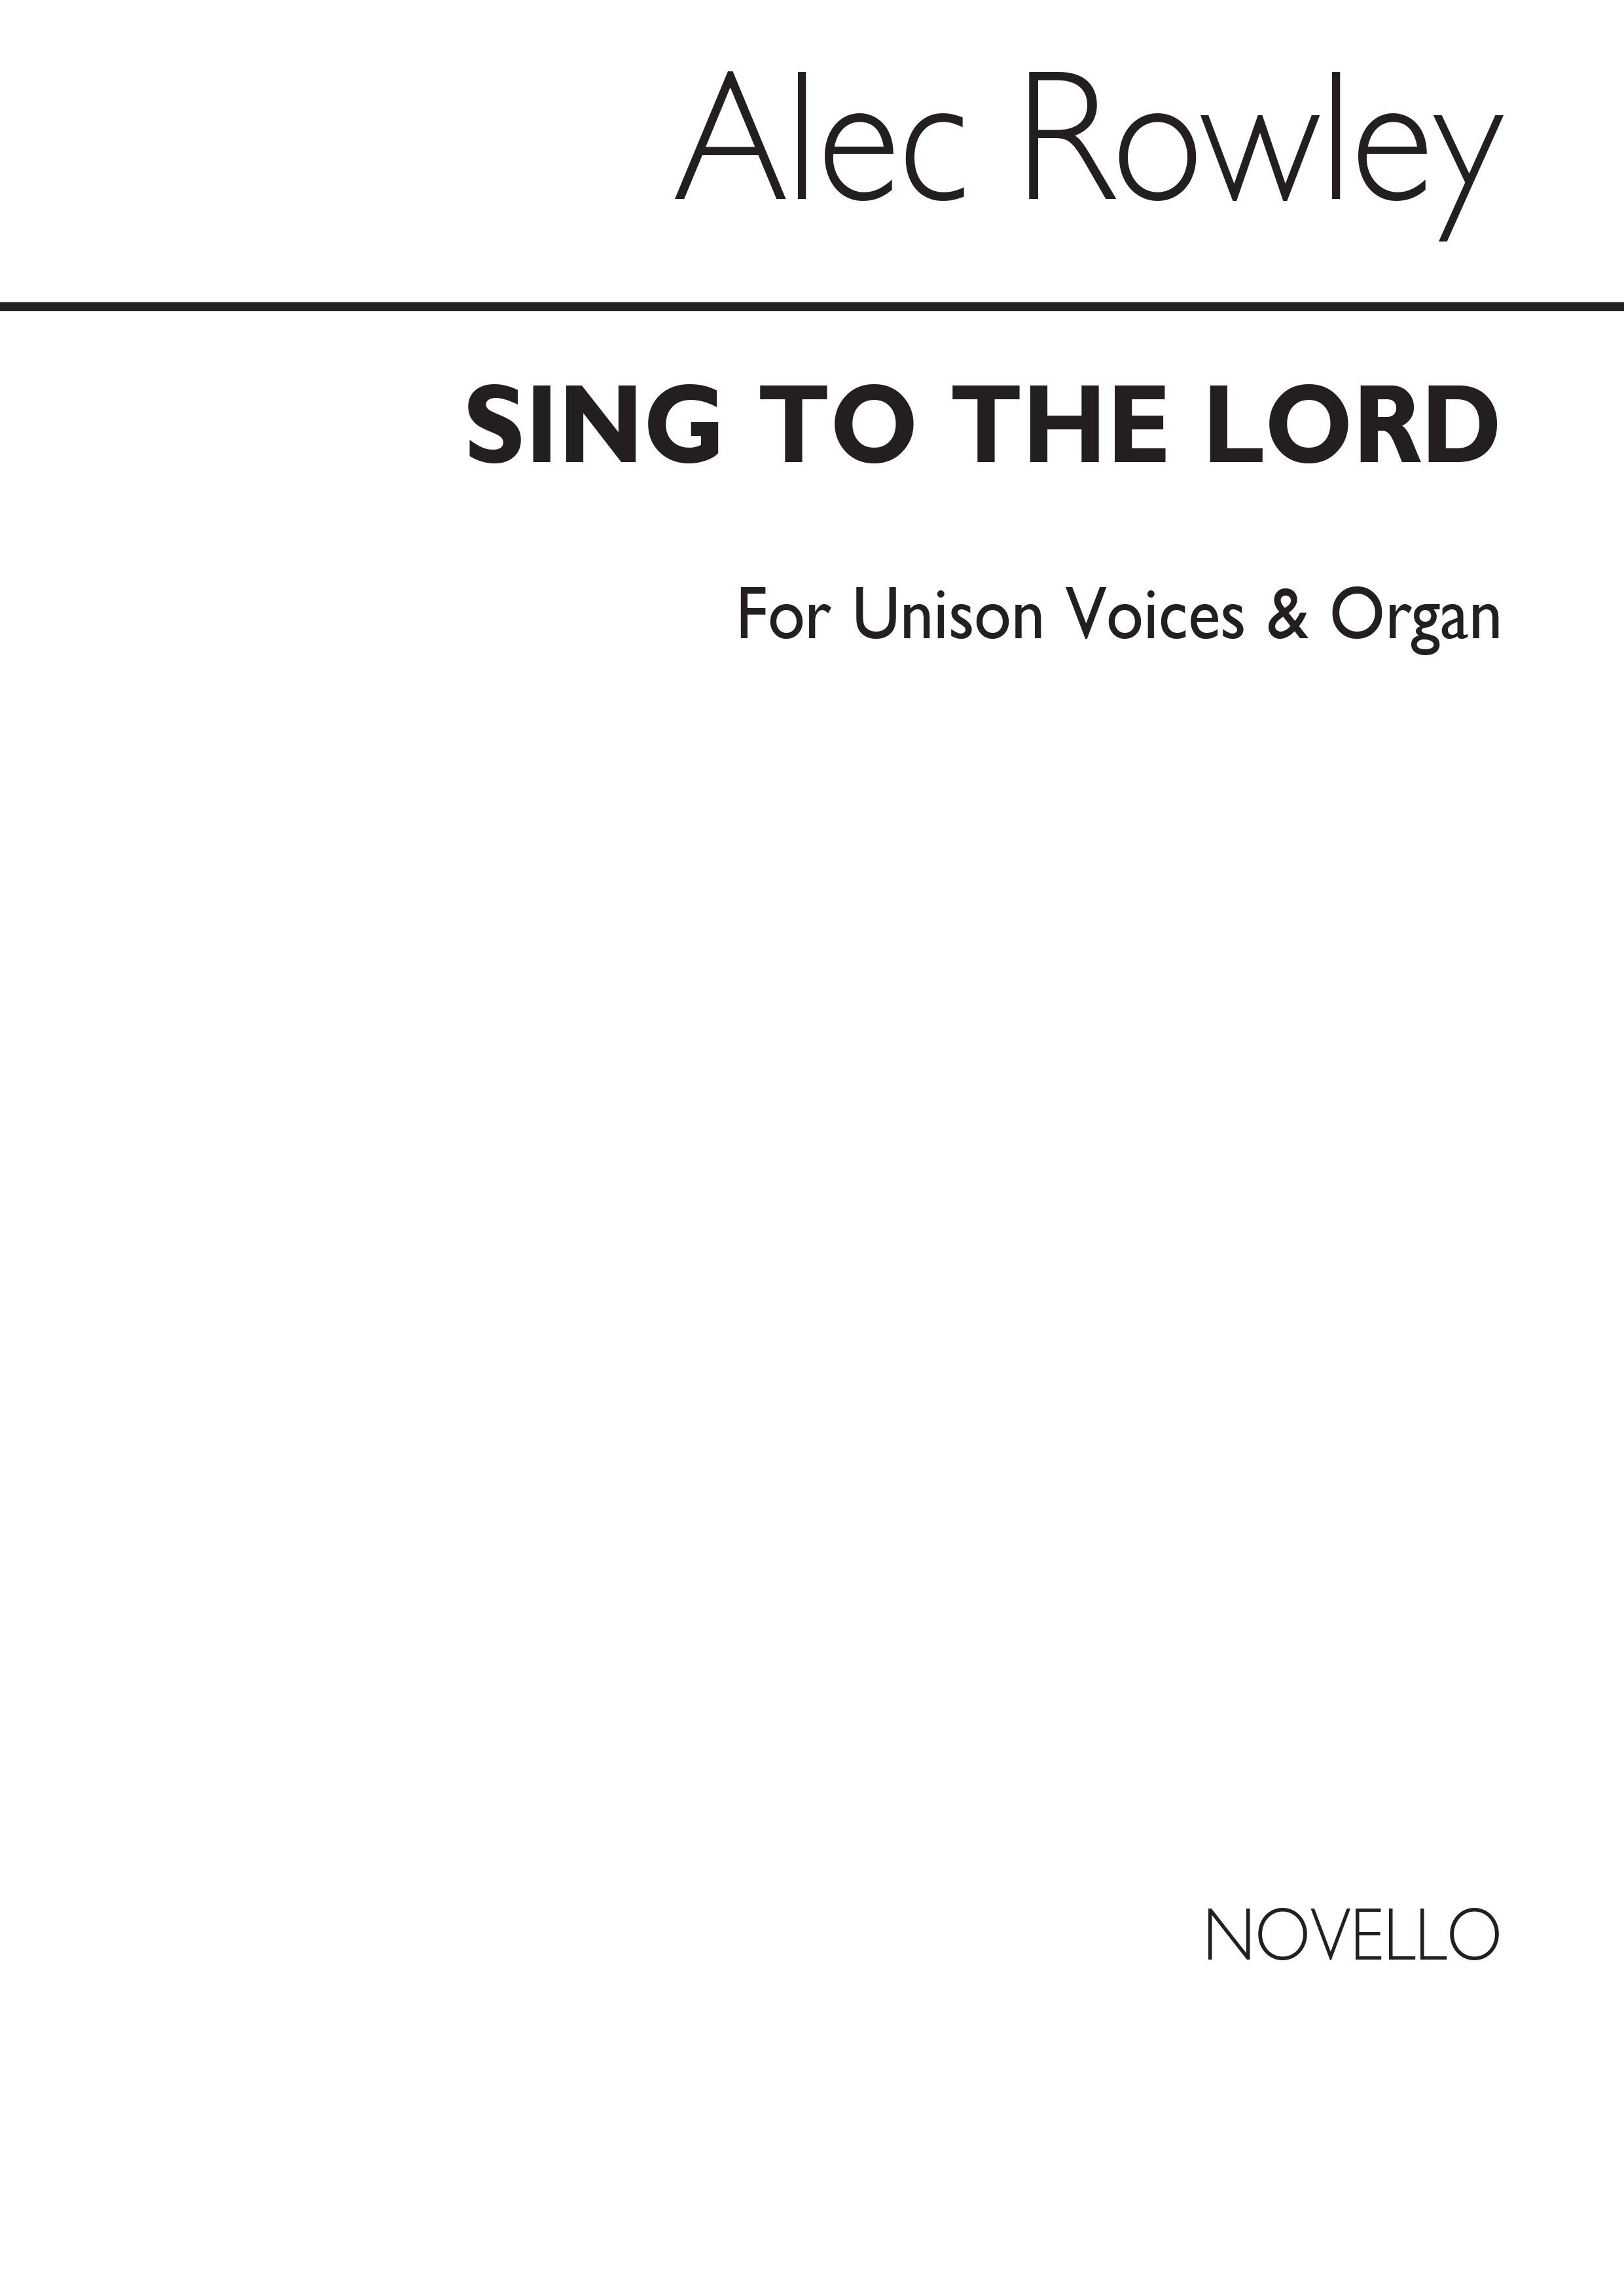 Rowley: Sing To The Lord for Unison Voices